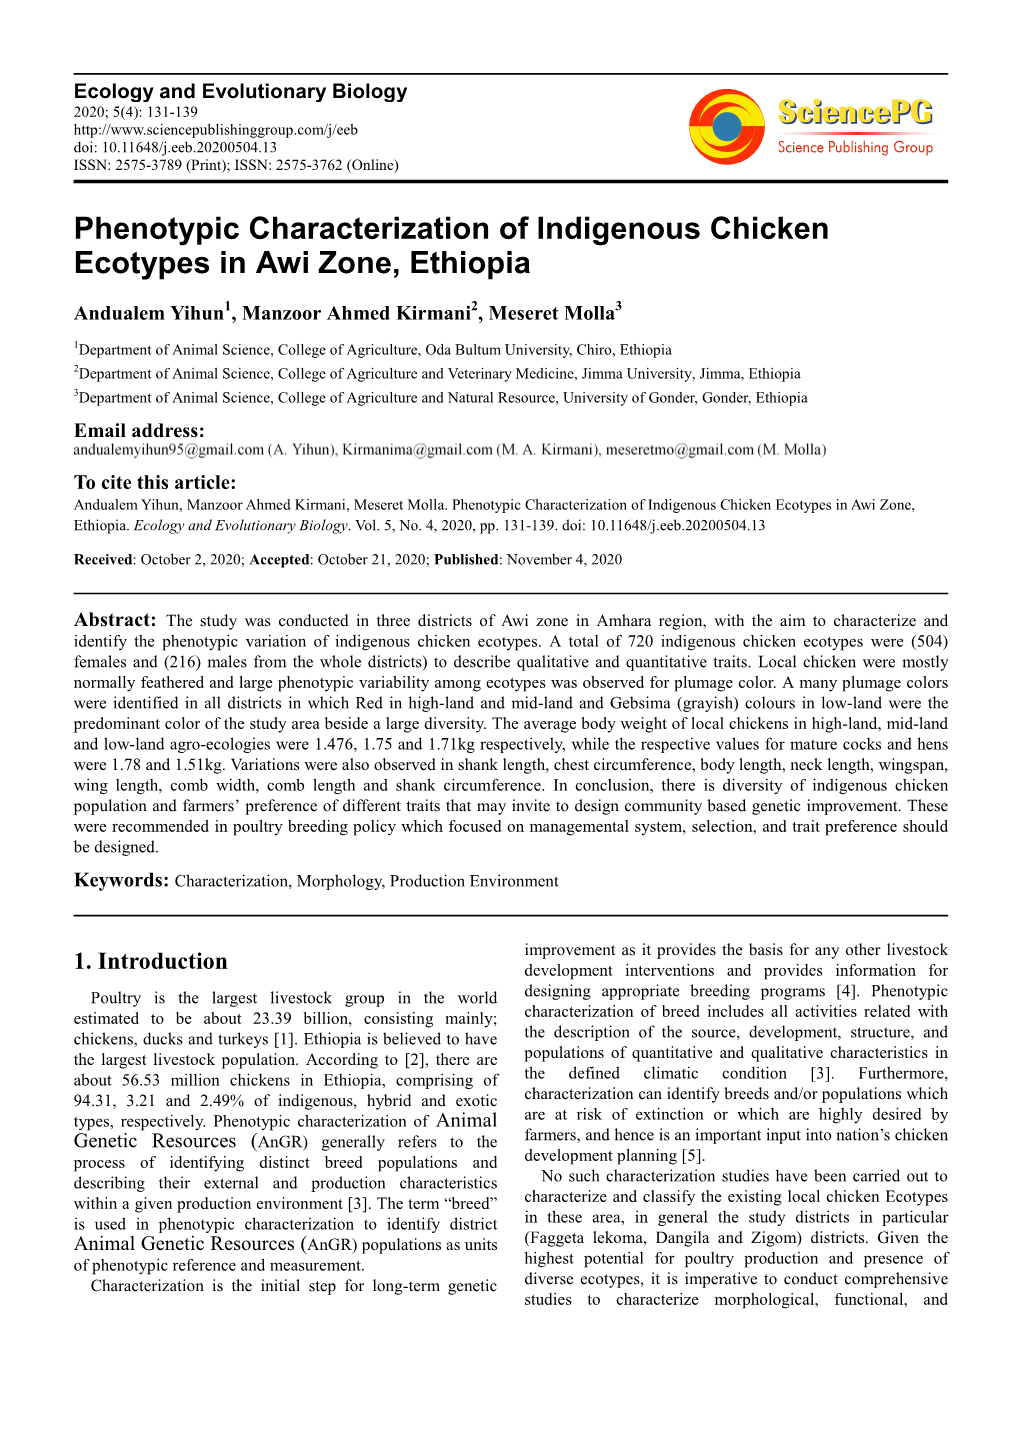 Phenotypic Characterization of Indigenous Chicken Ecotypes in Awi Zone, Ethiopia